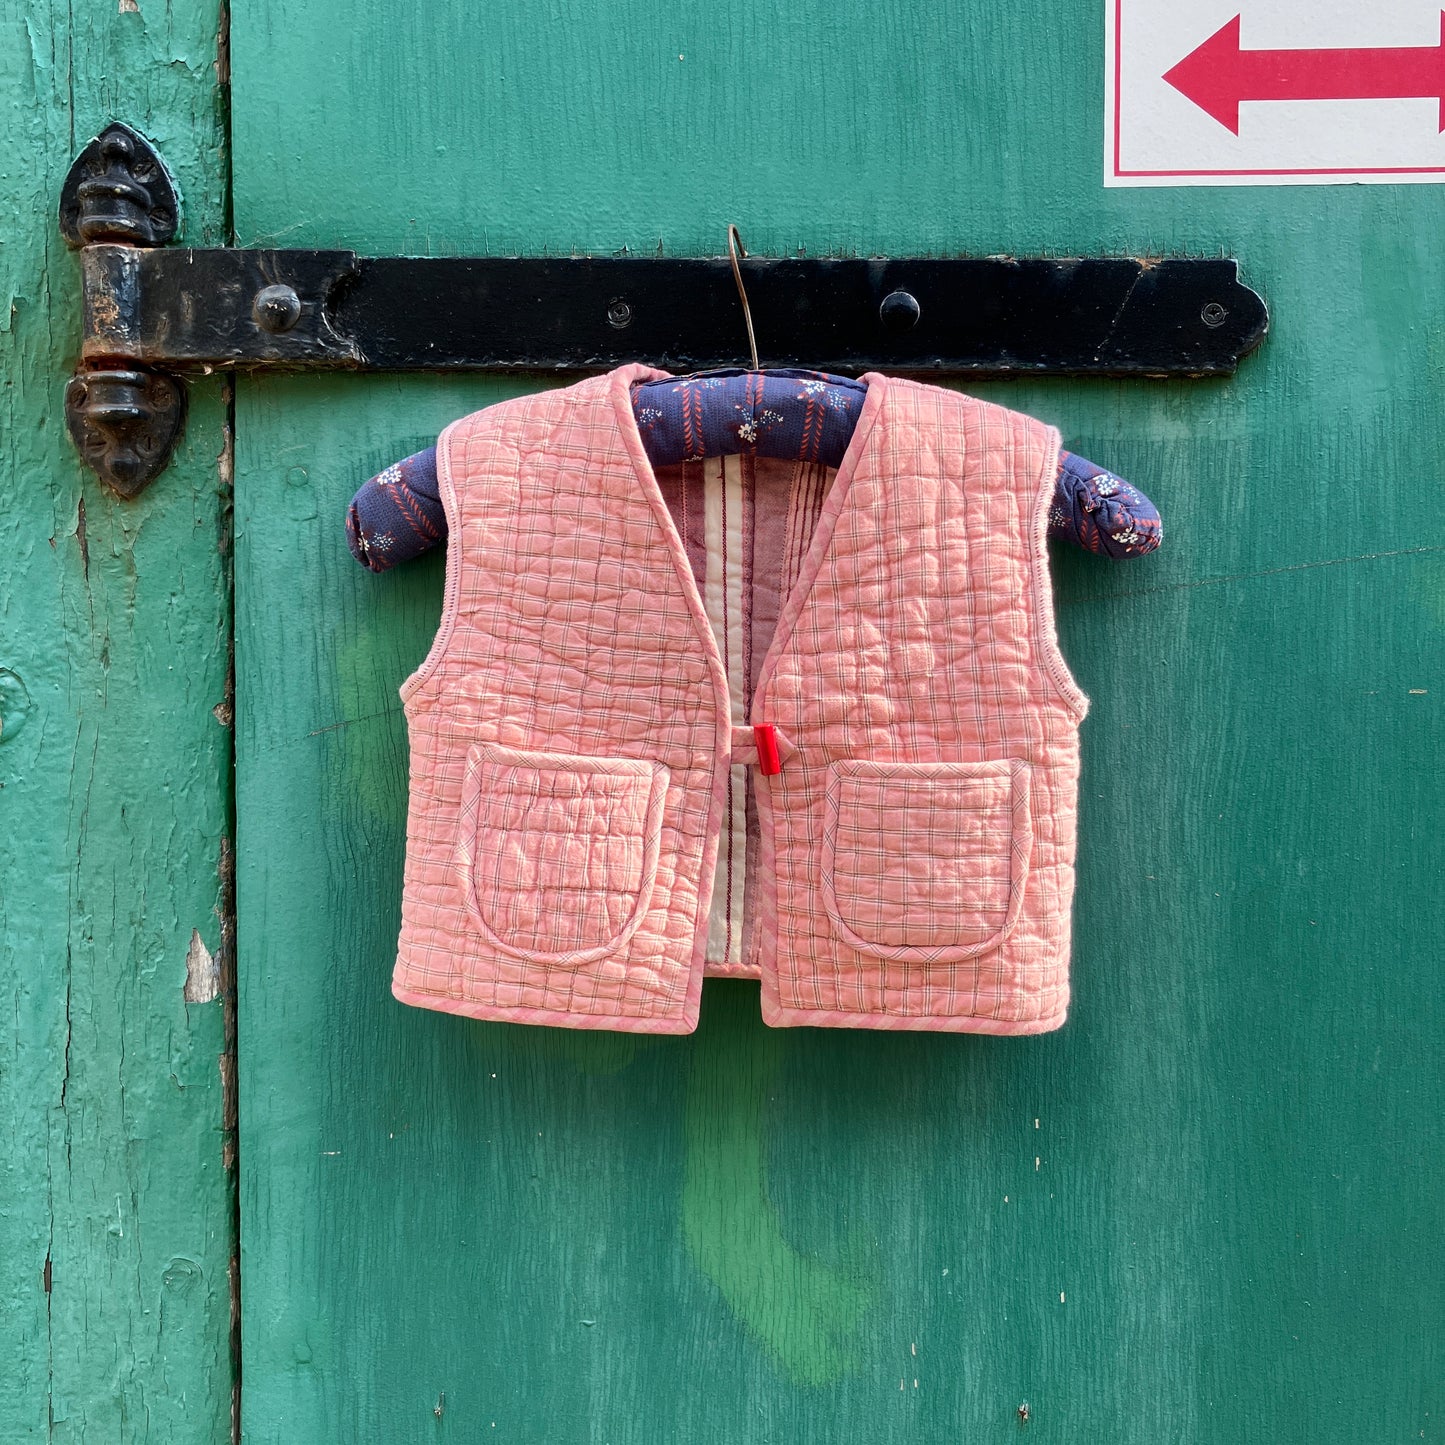 kids vest/gilet/waistcoat made from offcuts of a reclaimed pink quilt. Shown hanging on a blue vintage hanger against a green gate